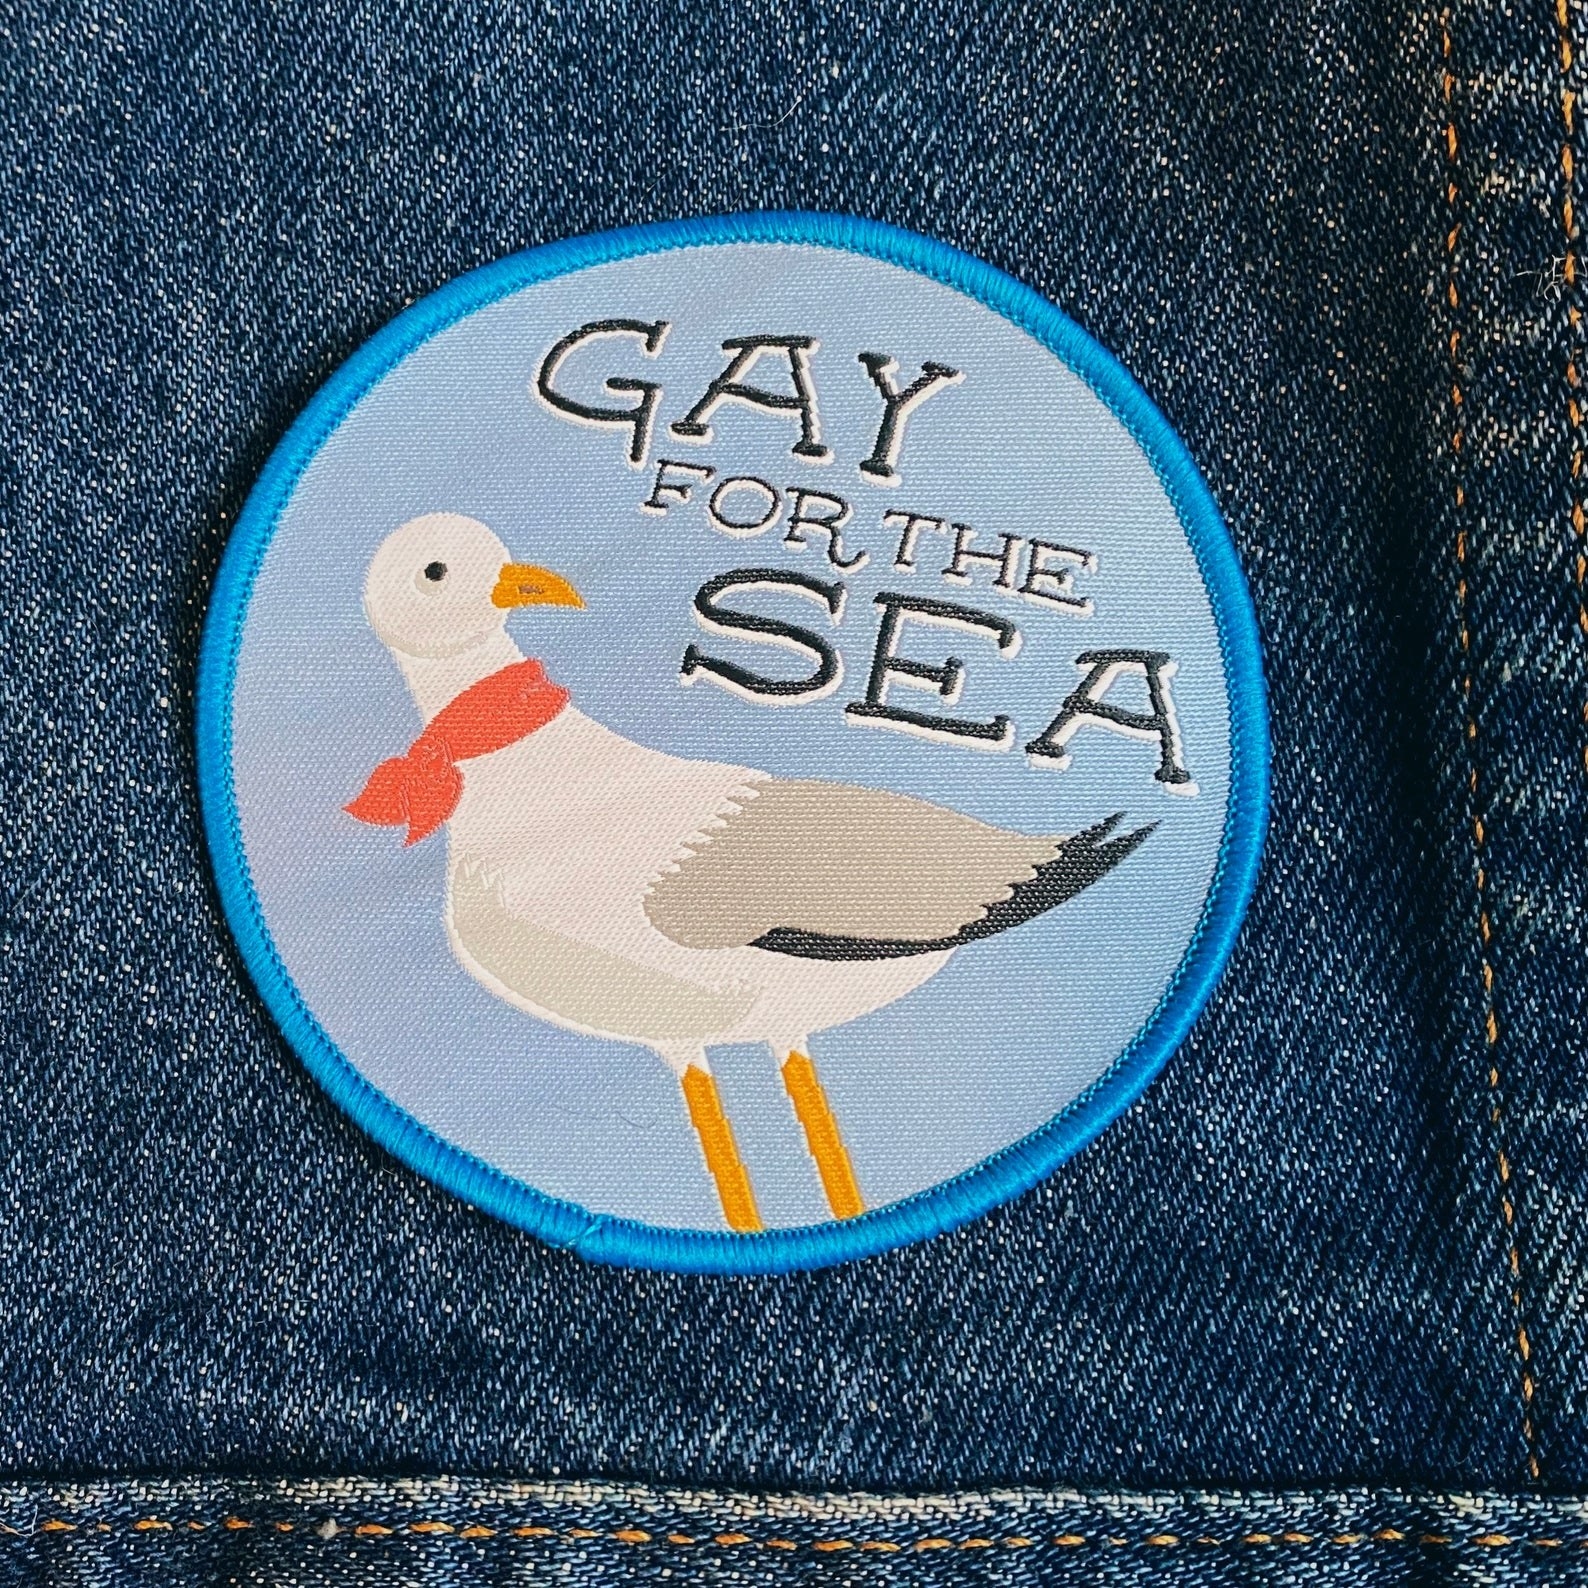 the gay for the sea patch featuring a seagull on a denim jacket